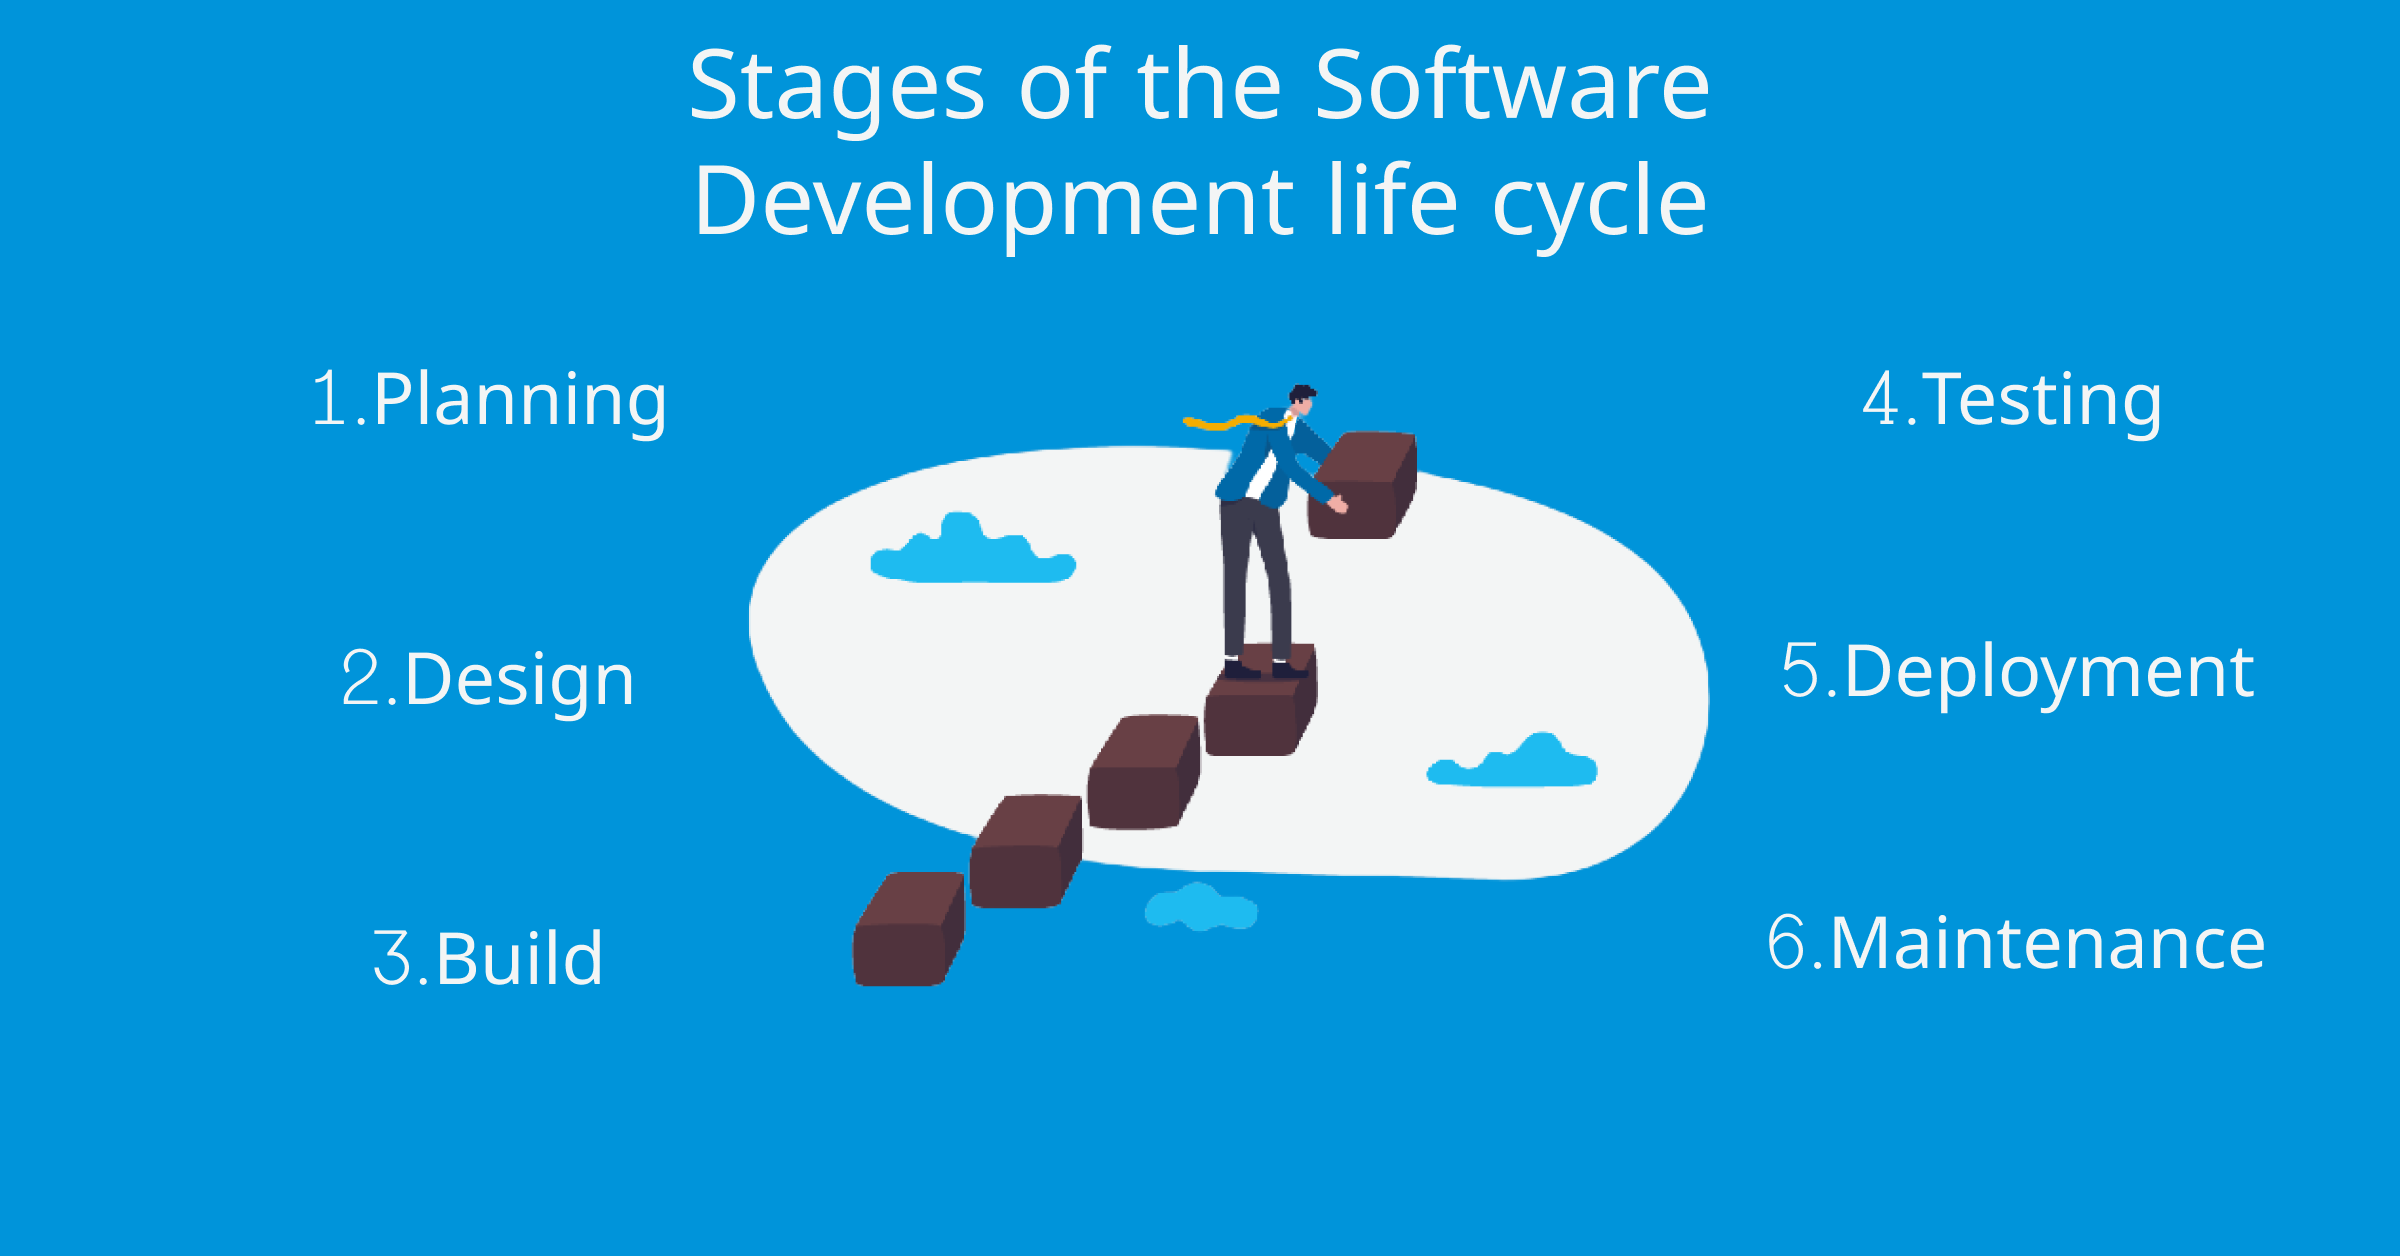 Stages of the Software Development Life Cycle